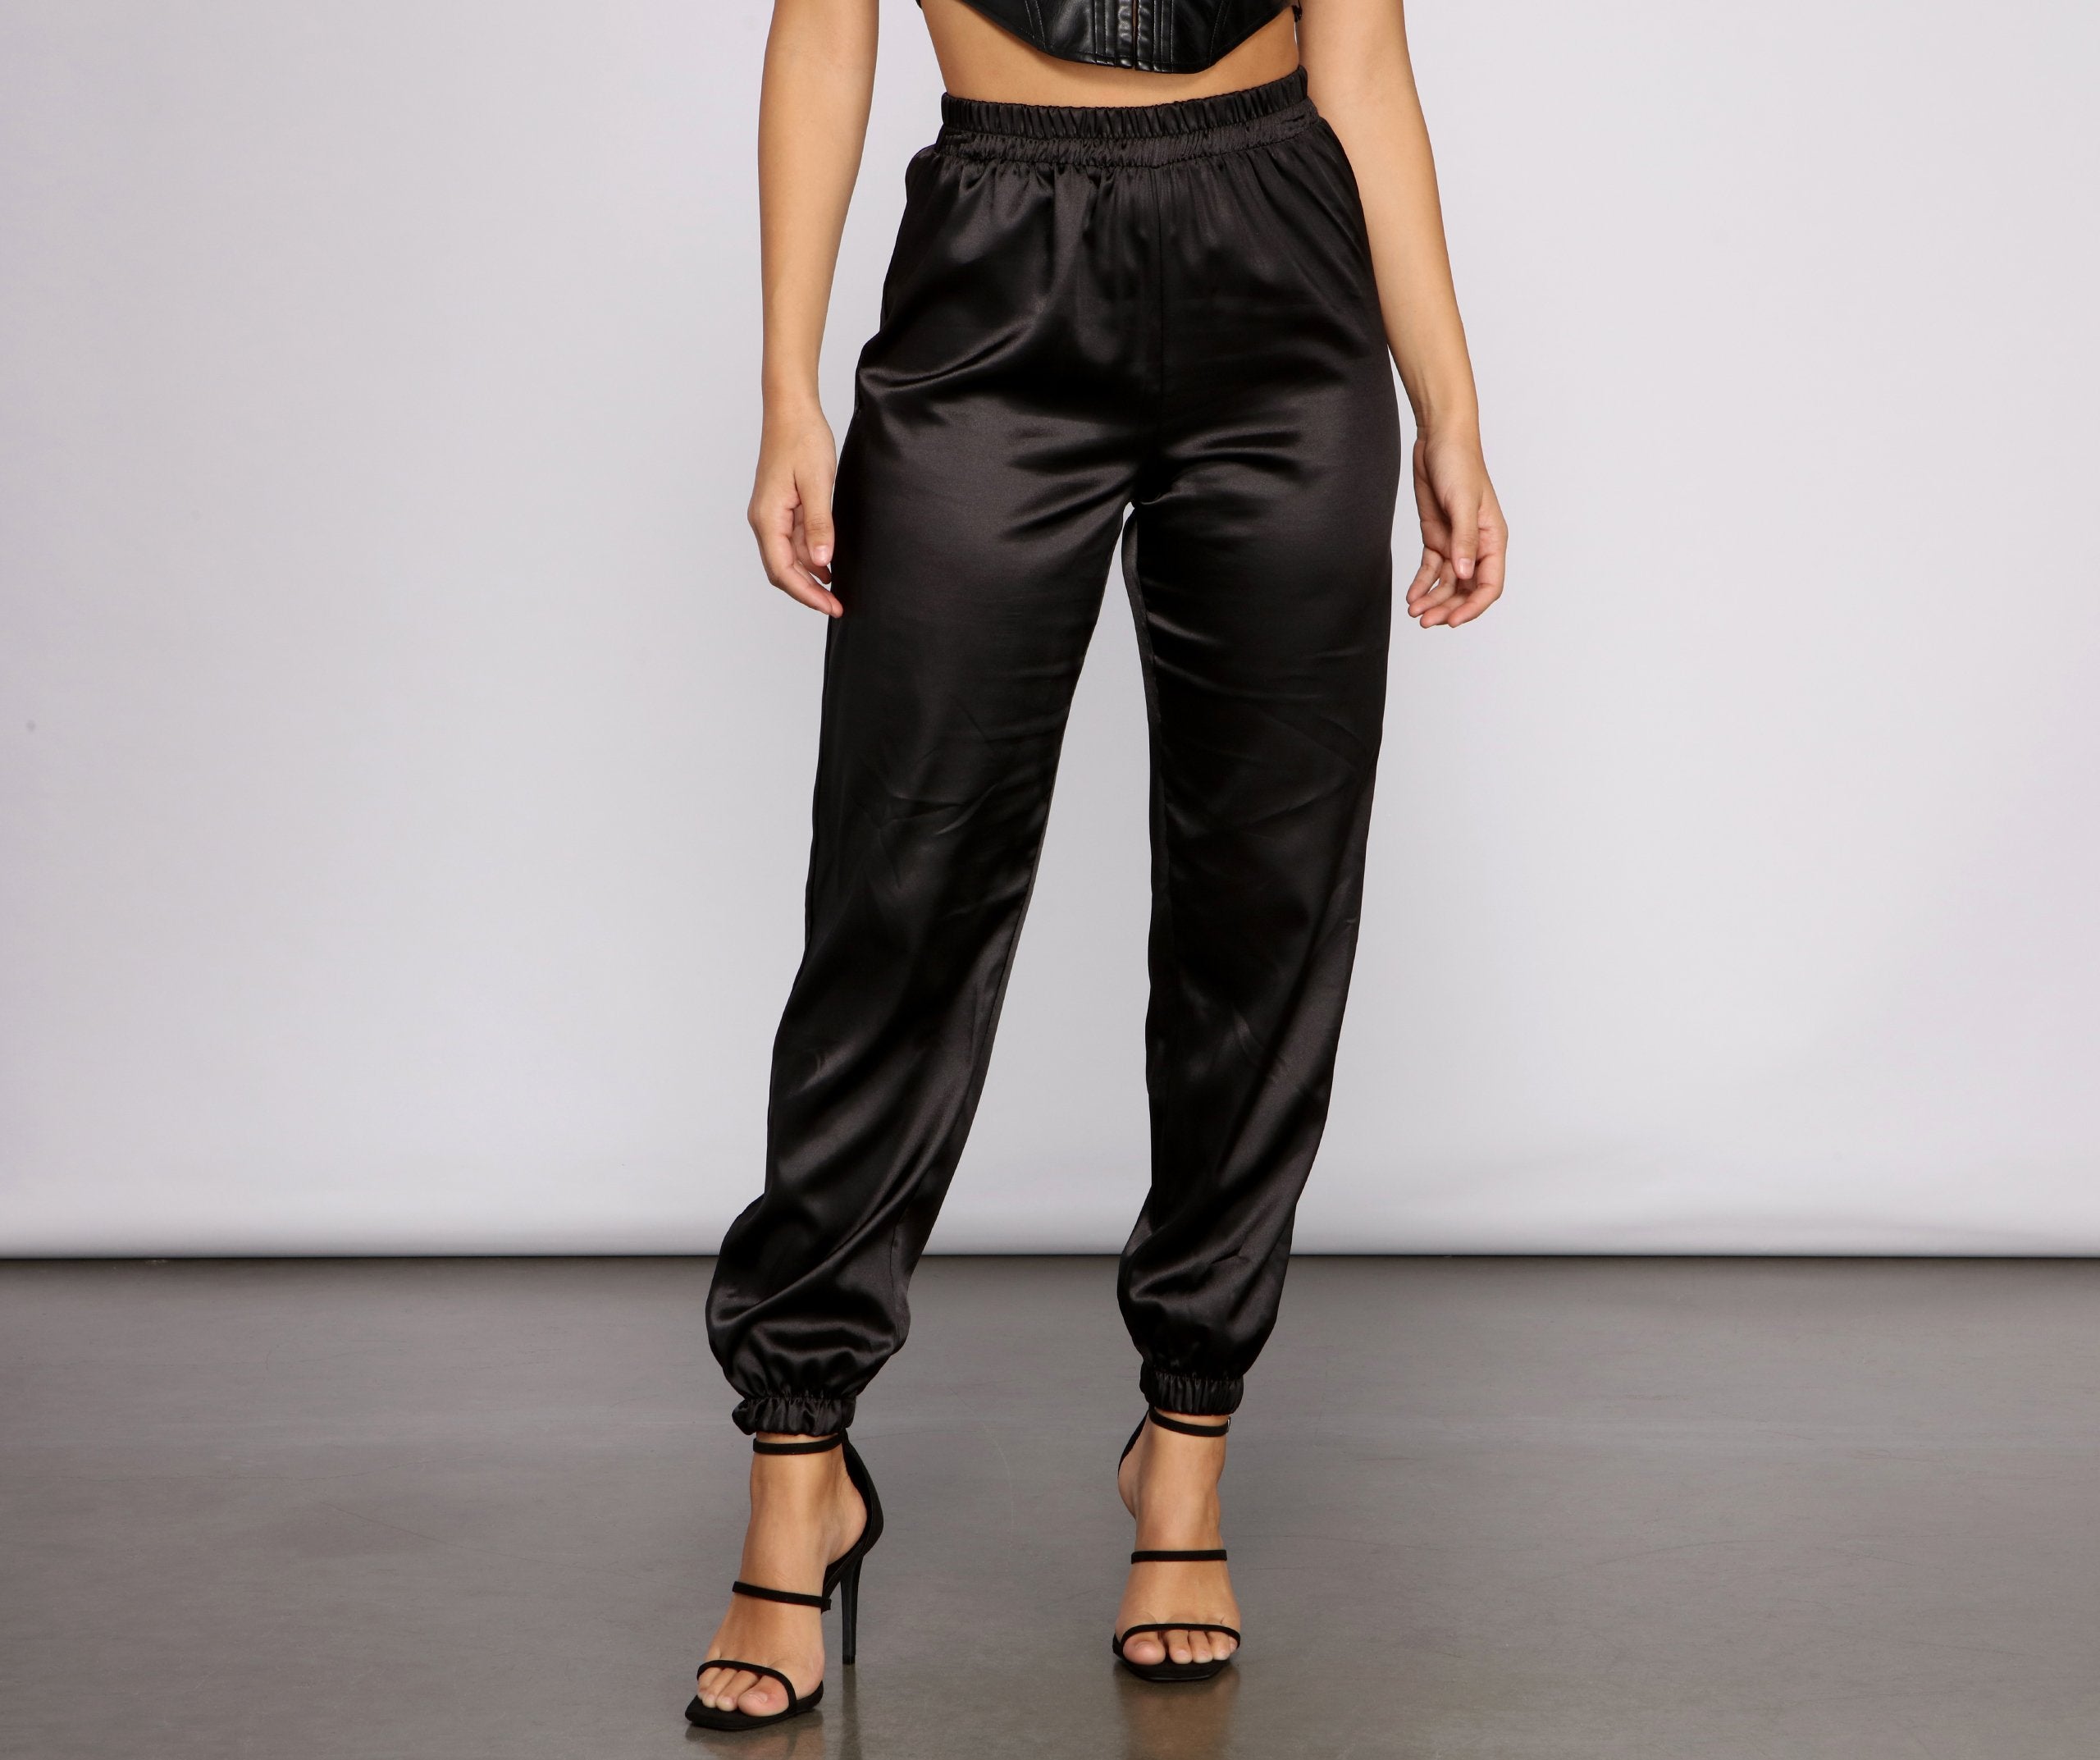 Sleek and Chic Satin Jogger Pants – Lady Occasions